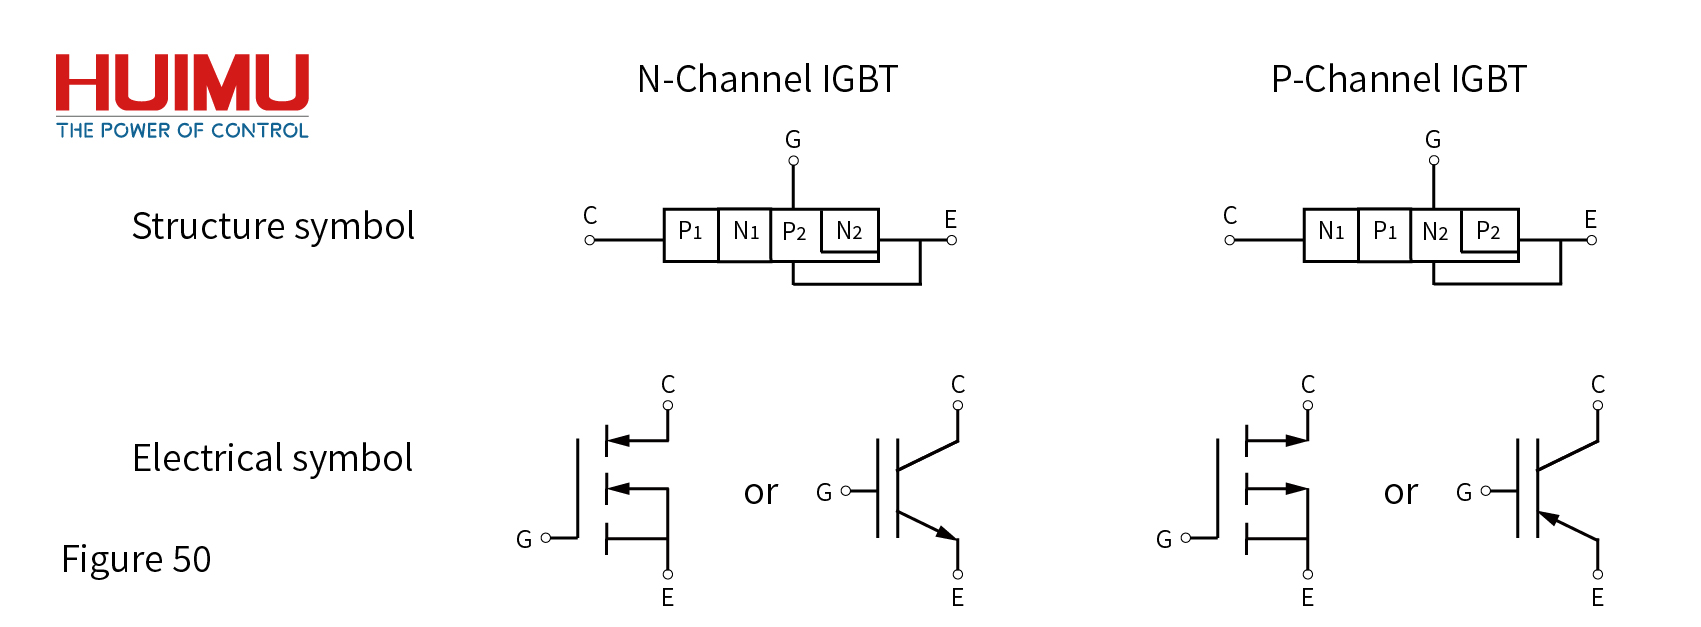 ntroduction to IGBT